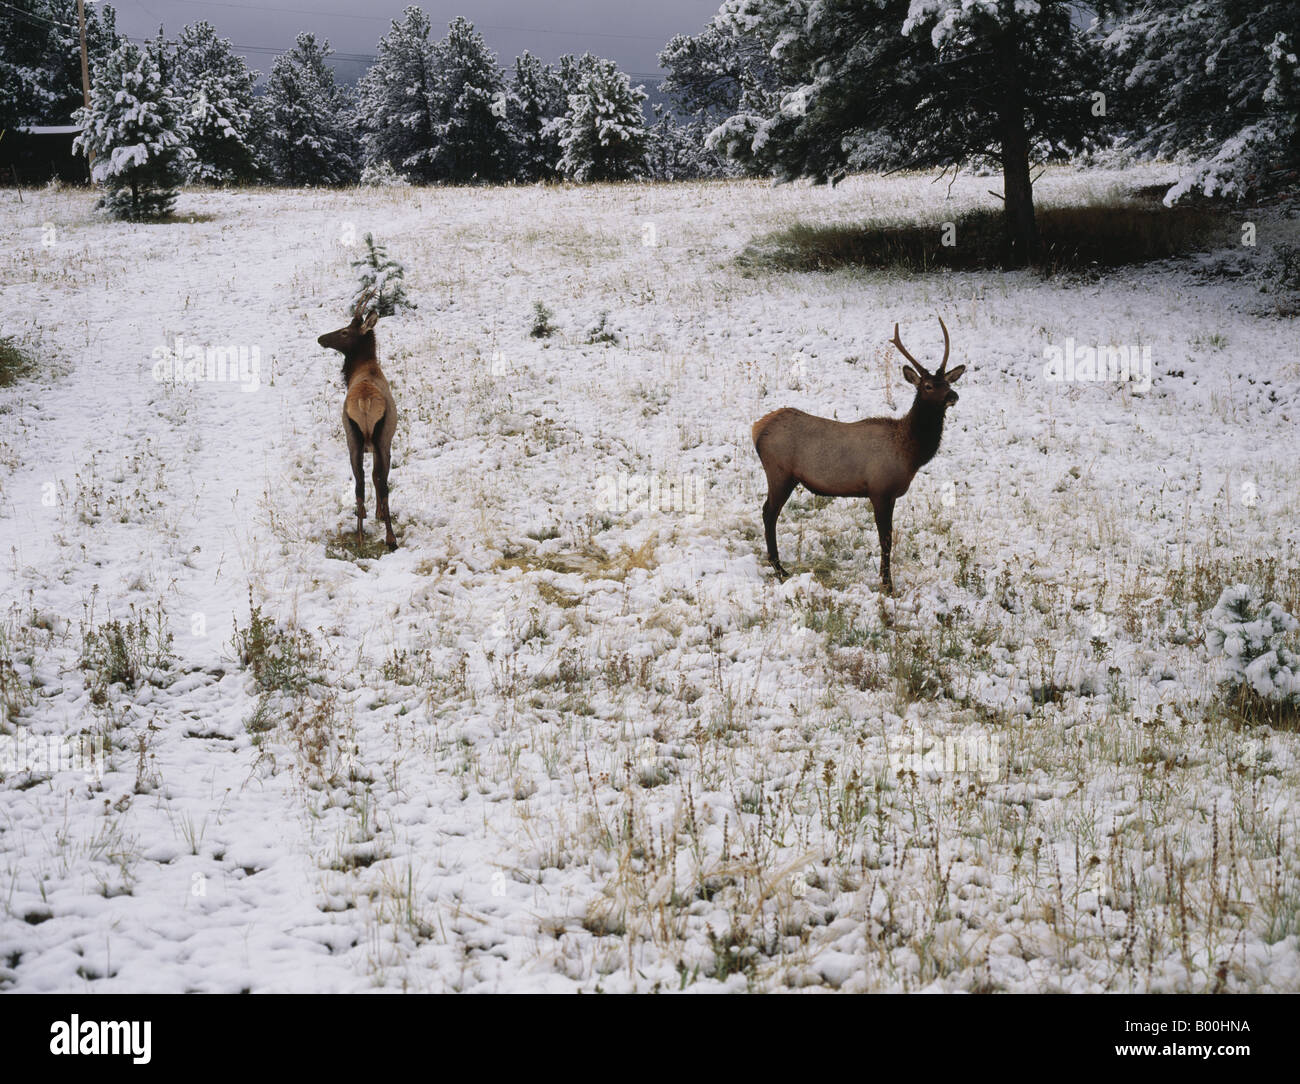 Two elk standing in early autumn snow Brown deer - like animals with antlers Trees ROCKY MOUNTAINS COLORADO USA Stock Photo